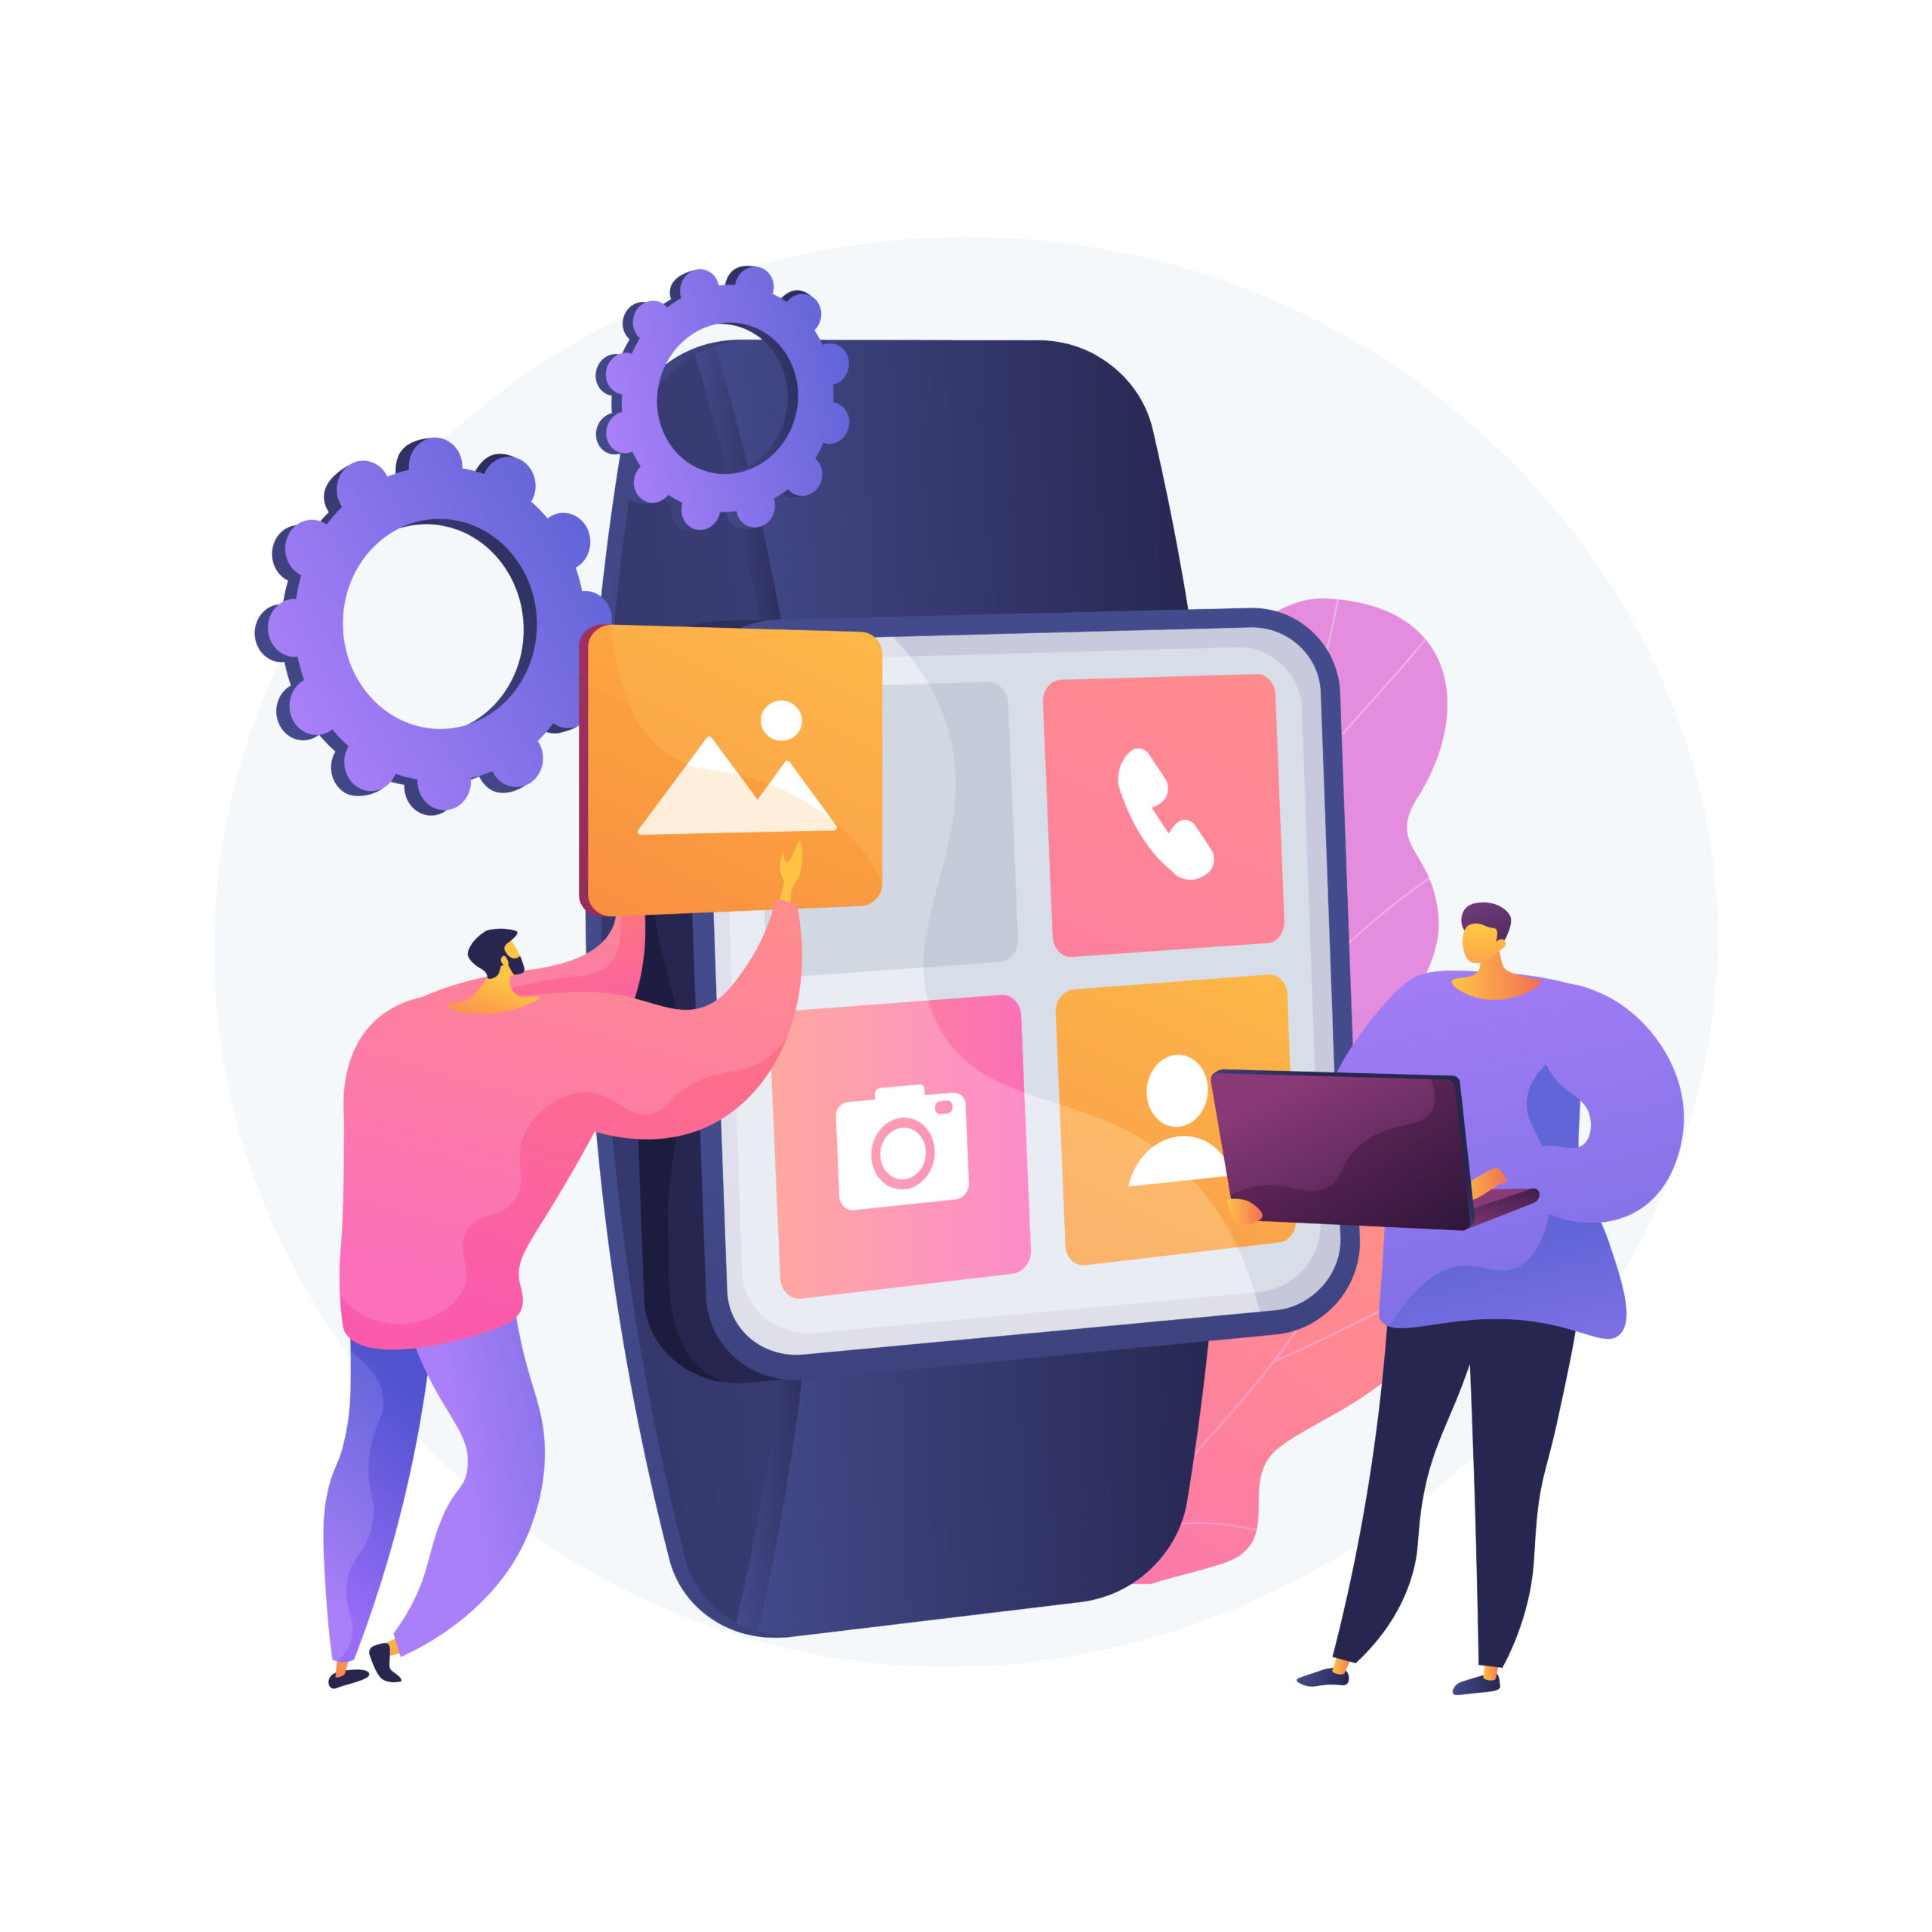 Smartwatches mobile apps development abstract concept vector illustration.